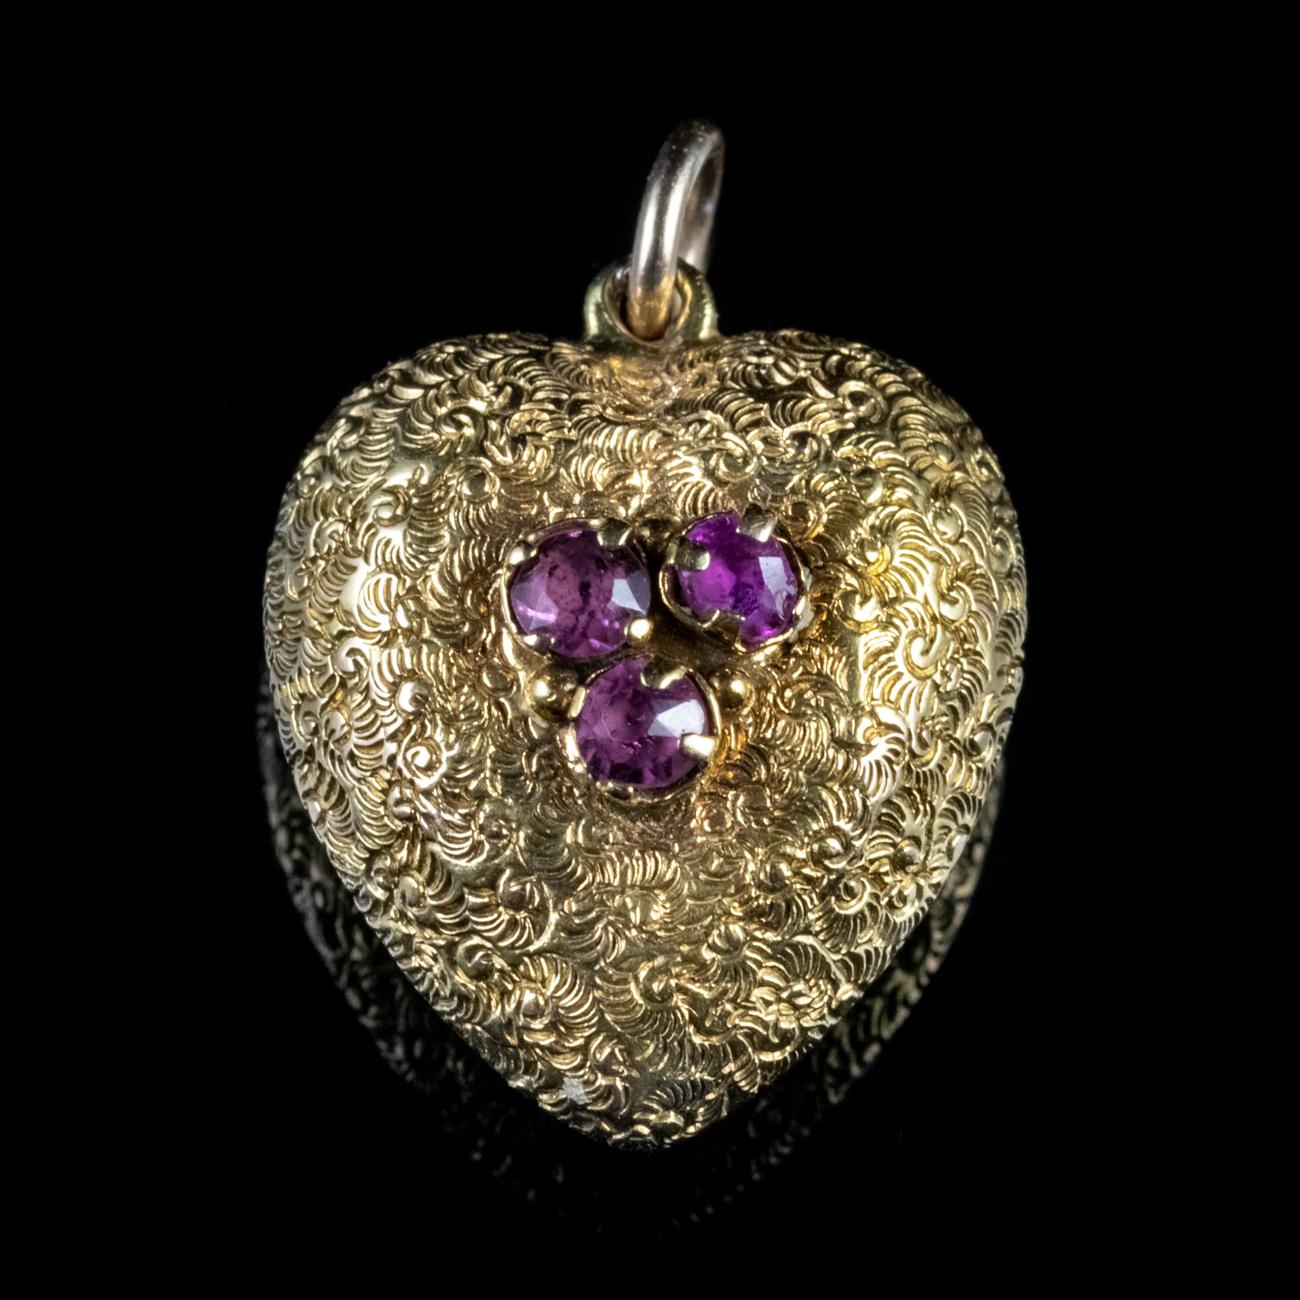 A beautiful Antique Georgian pendant in the shape of a heart, which is modelled in 18ct Yellow Gold. It features approx. 0.15ct of Amethysts on the front, a stunning 3ct Amethyst on the back and is fully engraved with fine detailing.

Amethyst has